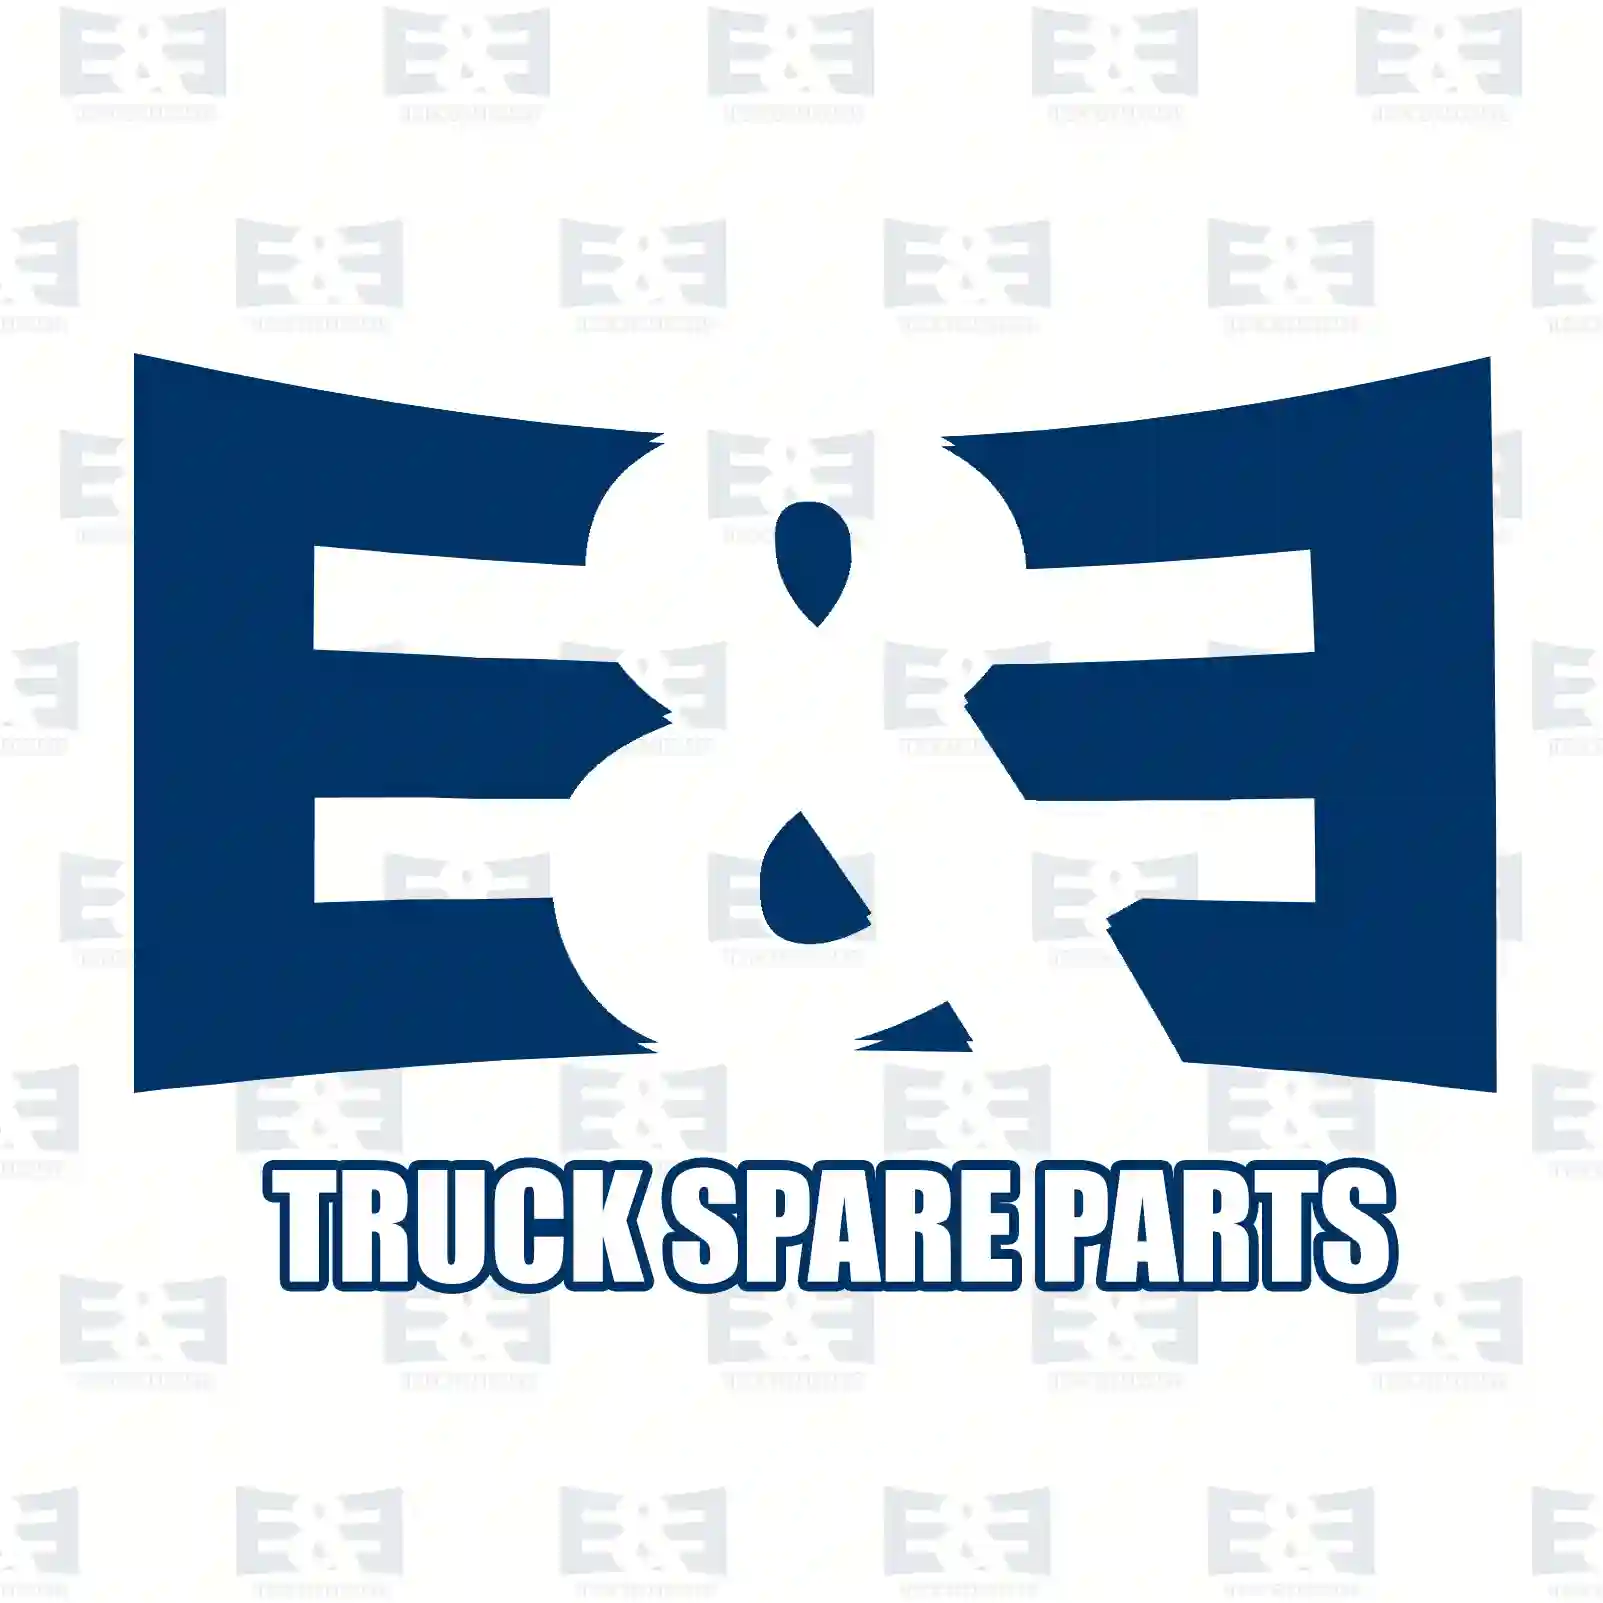  Spring retainer, intake and exhaust || E&E Truck Spare Parts | Truck Spare Parts, Auotomotive Spare Parts